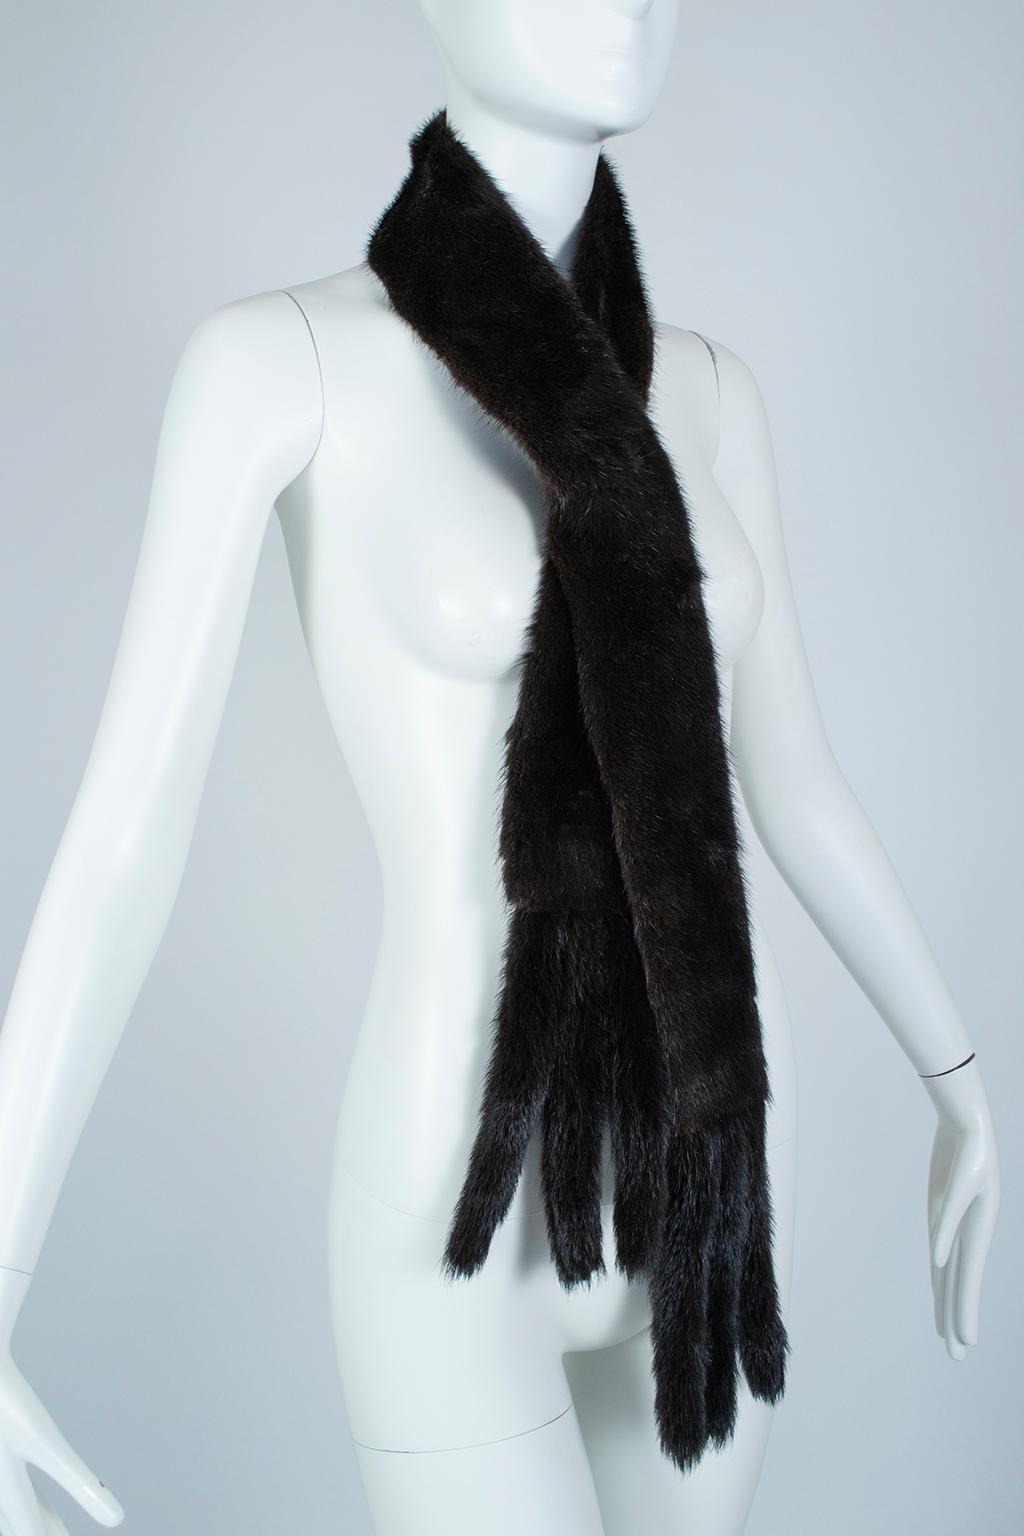 Fur shoulder cowls are as timeless as a set of pearls; supremely ladylike, tasteful and essential with strapless dresses, they will never go out of style.  The narrow design permits styling as scarf or belt, and the quilted satin lining is a subtle